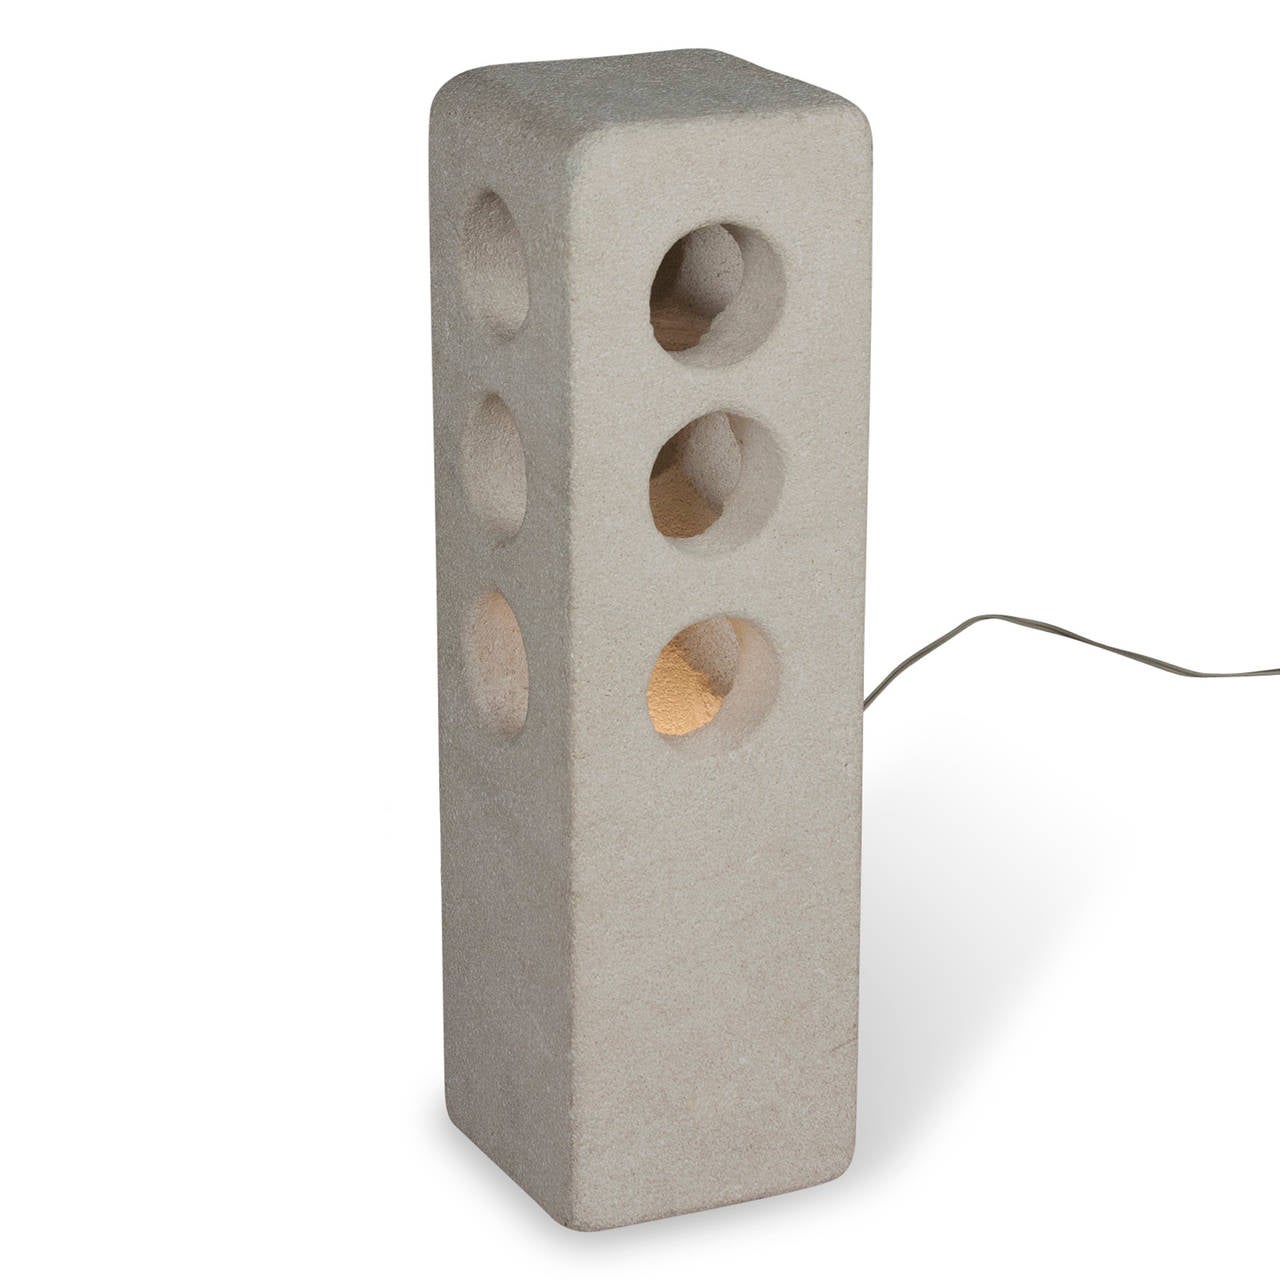 The sculpted stone column lamp, the rectangular form having three circular openings on each side, by A. Tormos, French, circa 1970. Signed 